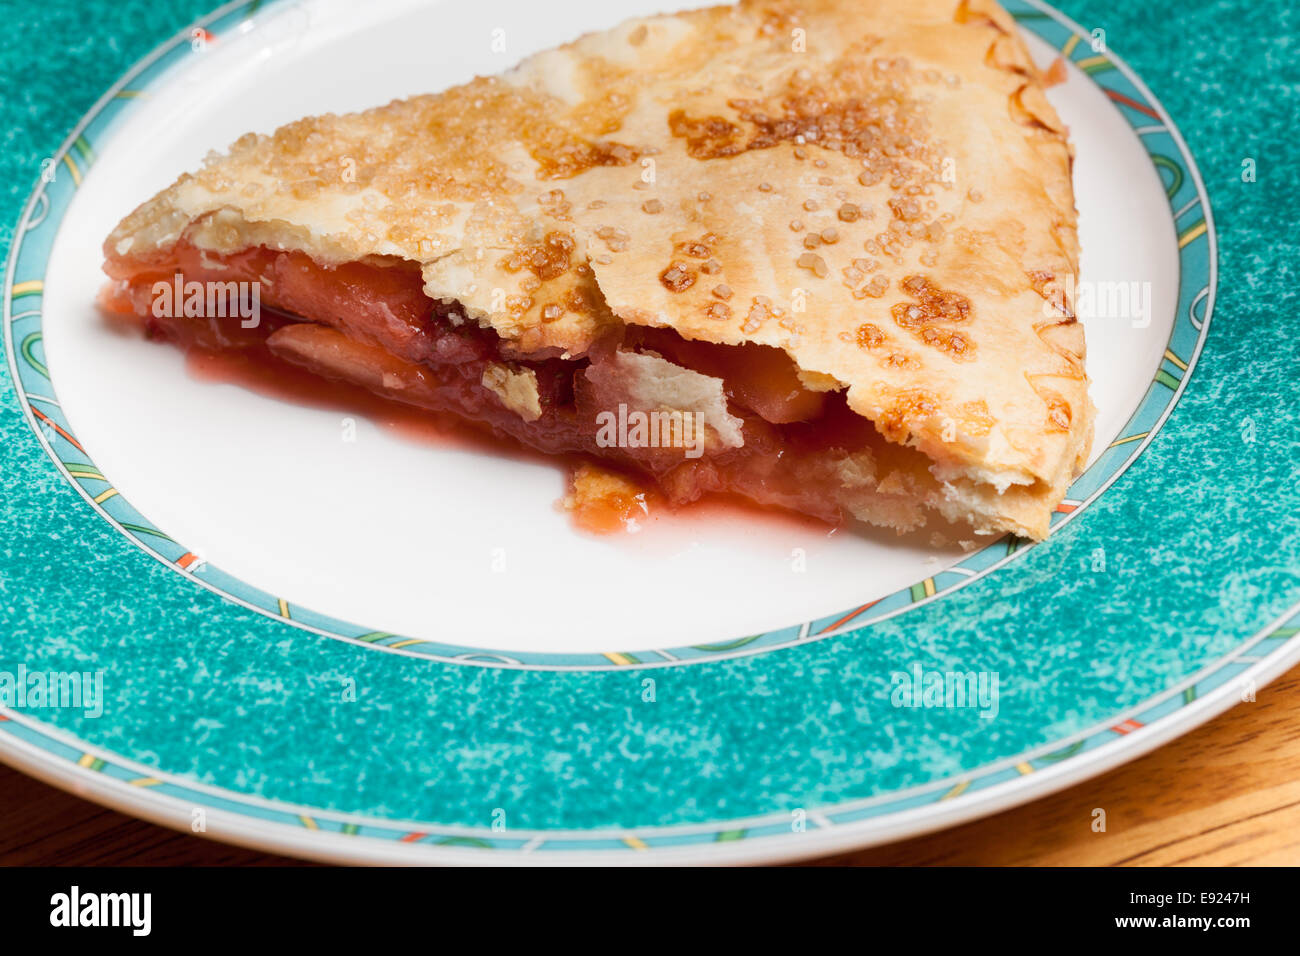 Home made apple and strawberry pie Stock Photo